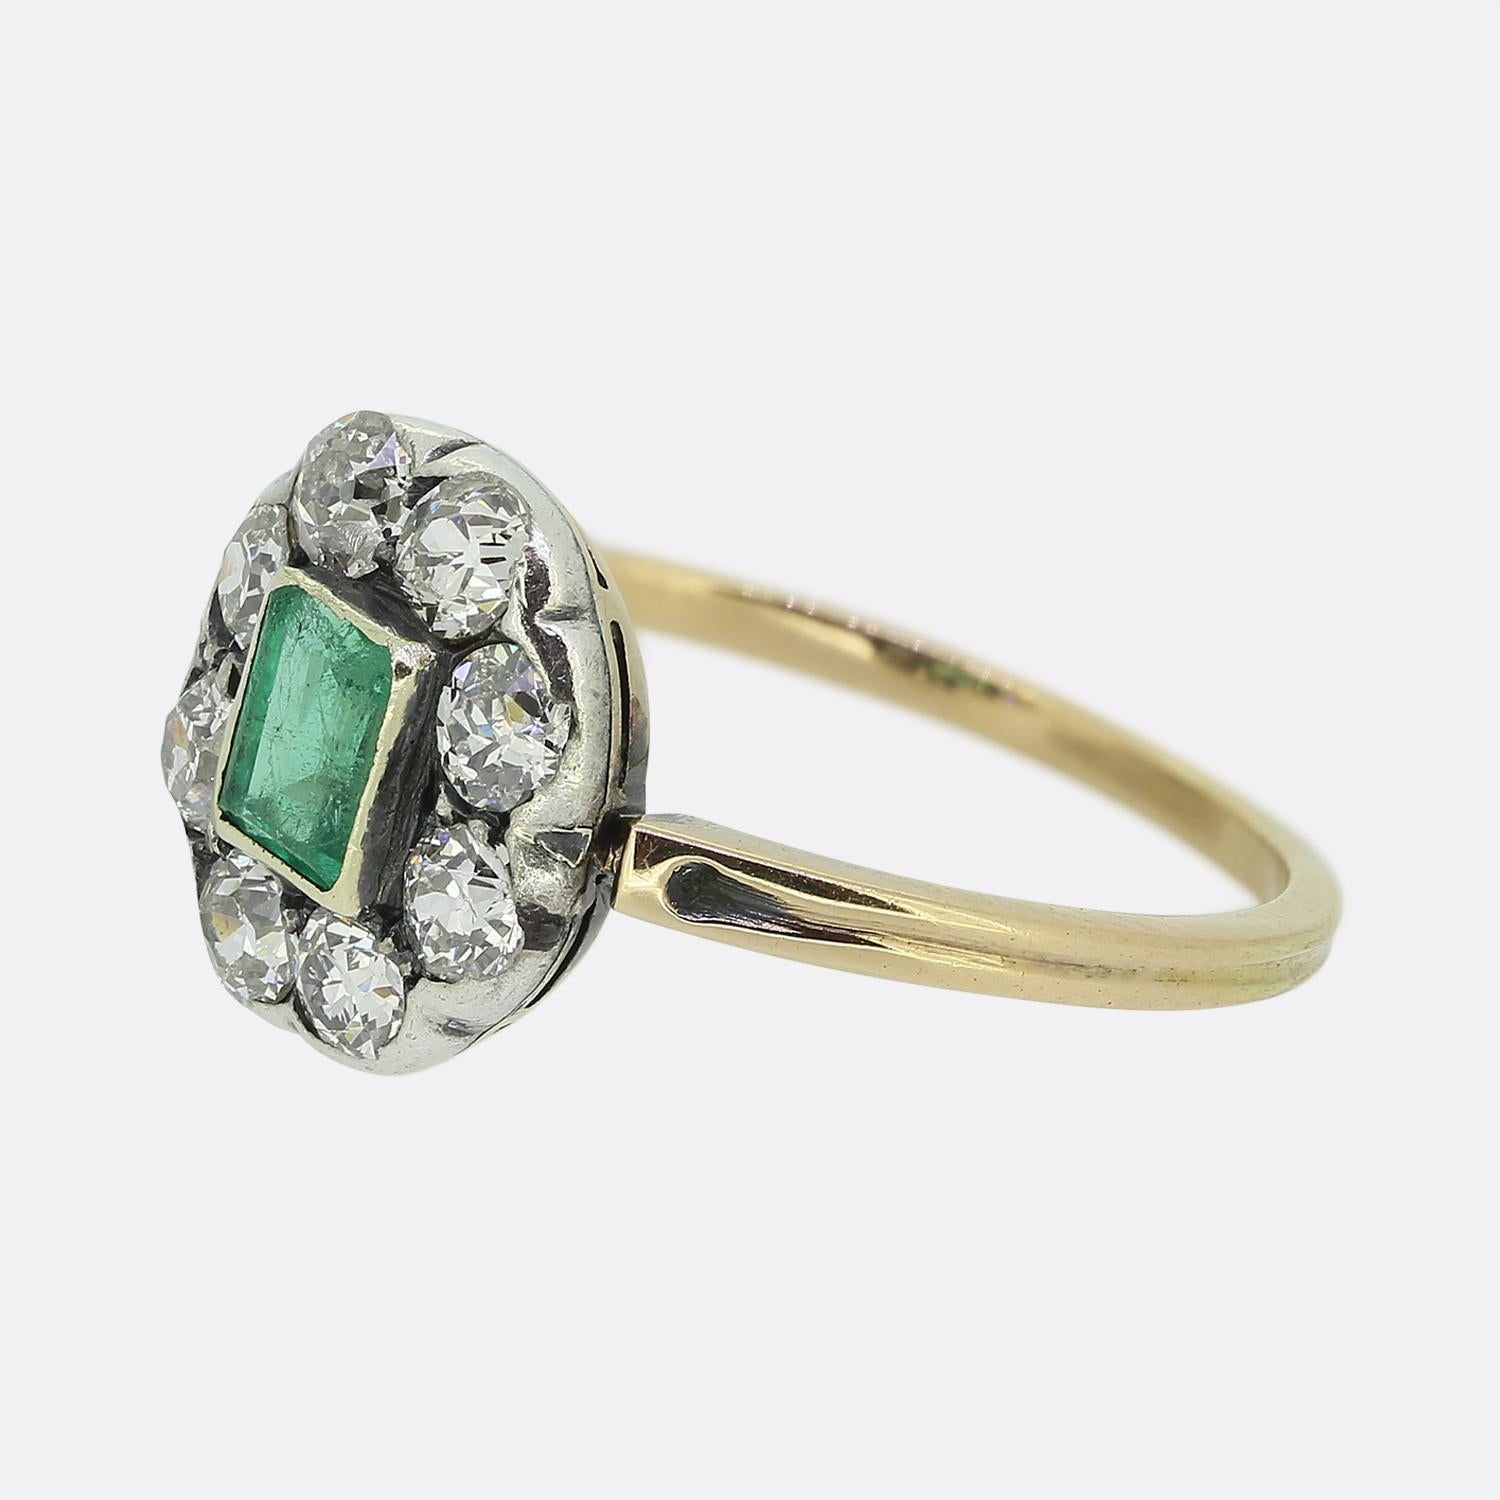 Here we a wonderful emerald and diamond cluster ring dating back to the Victorian period. This antique piece showcases a single emerald cut natural emerald which sits slightly risen at the centre of the face in a bezel style setting. This principal